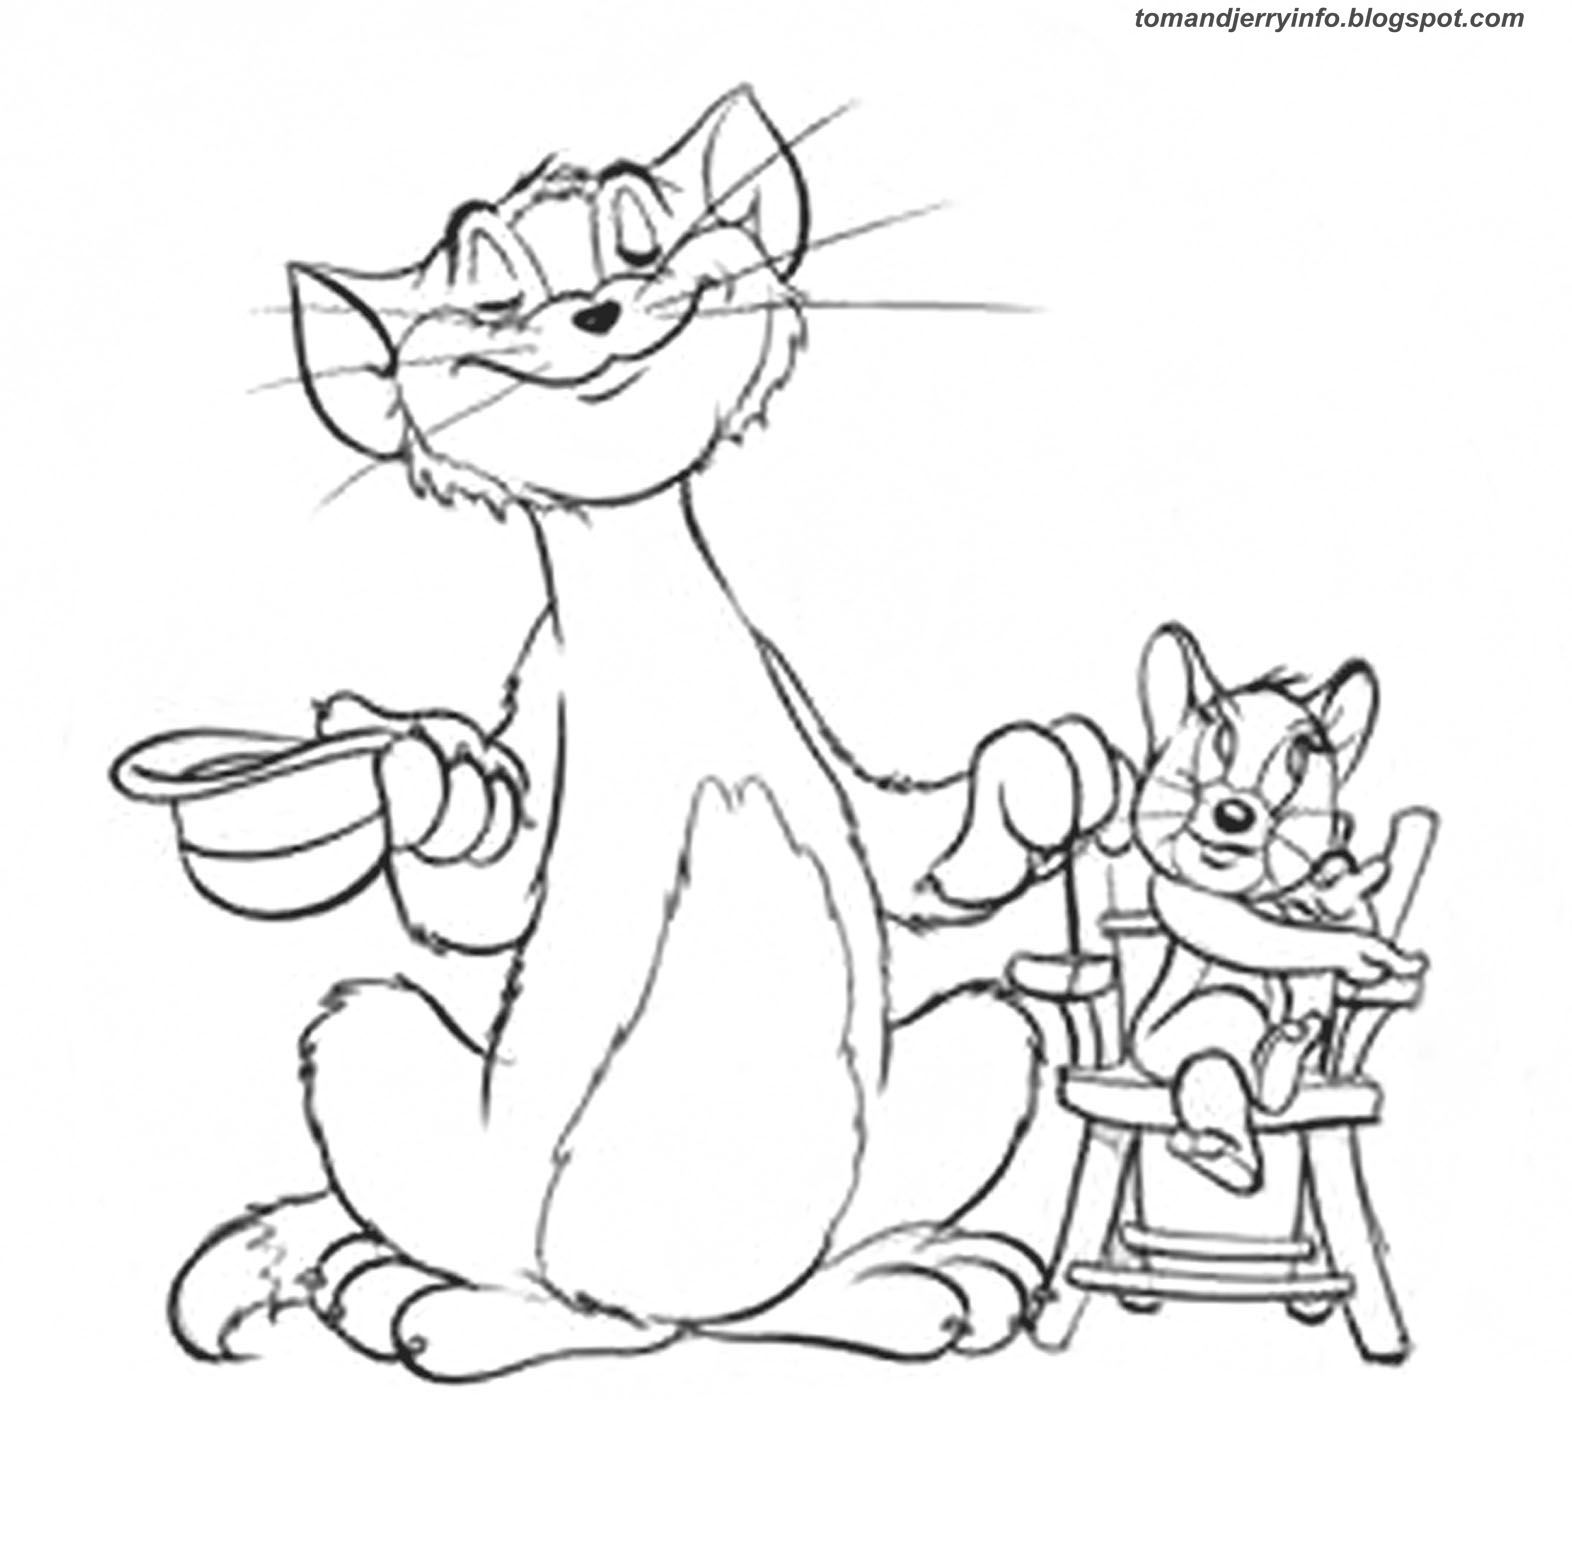 Baby Tom Jerry Coloring Pages - Coloring Pages For All Ages